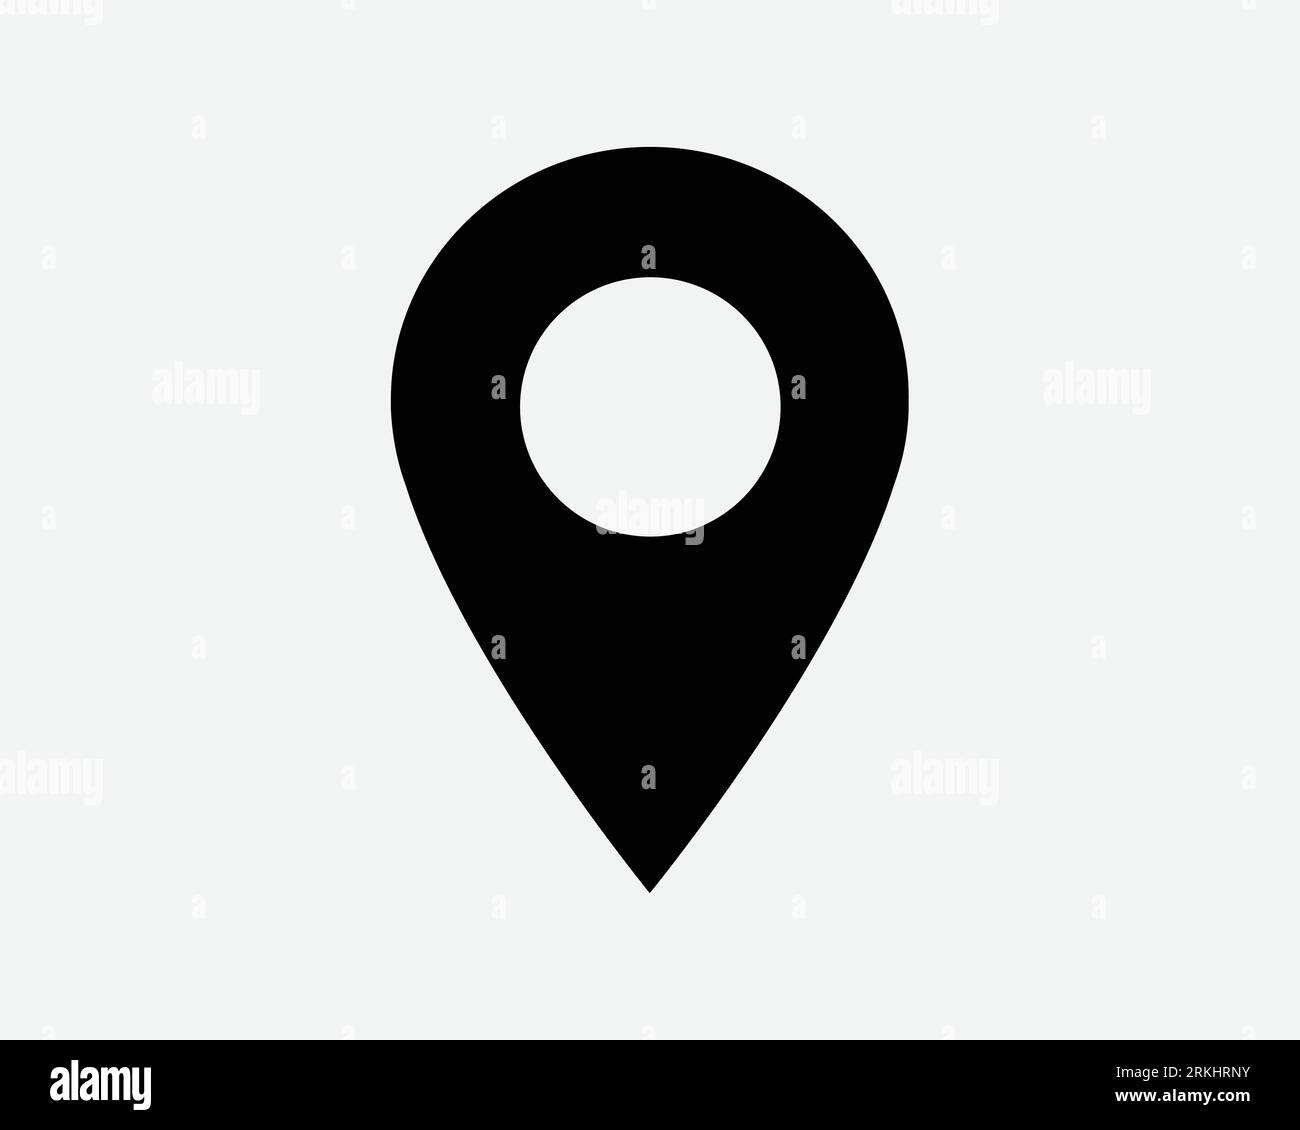 Location Pin Icon GPS Map Position Satellite Navigation Direction Place Mark Marker Destination Search Black White Shape Outline Vector Sign Symbol Stock Vector